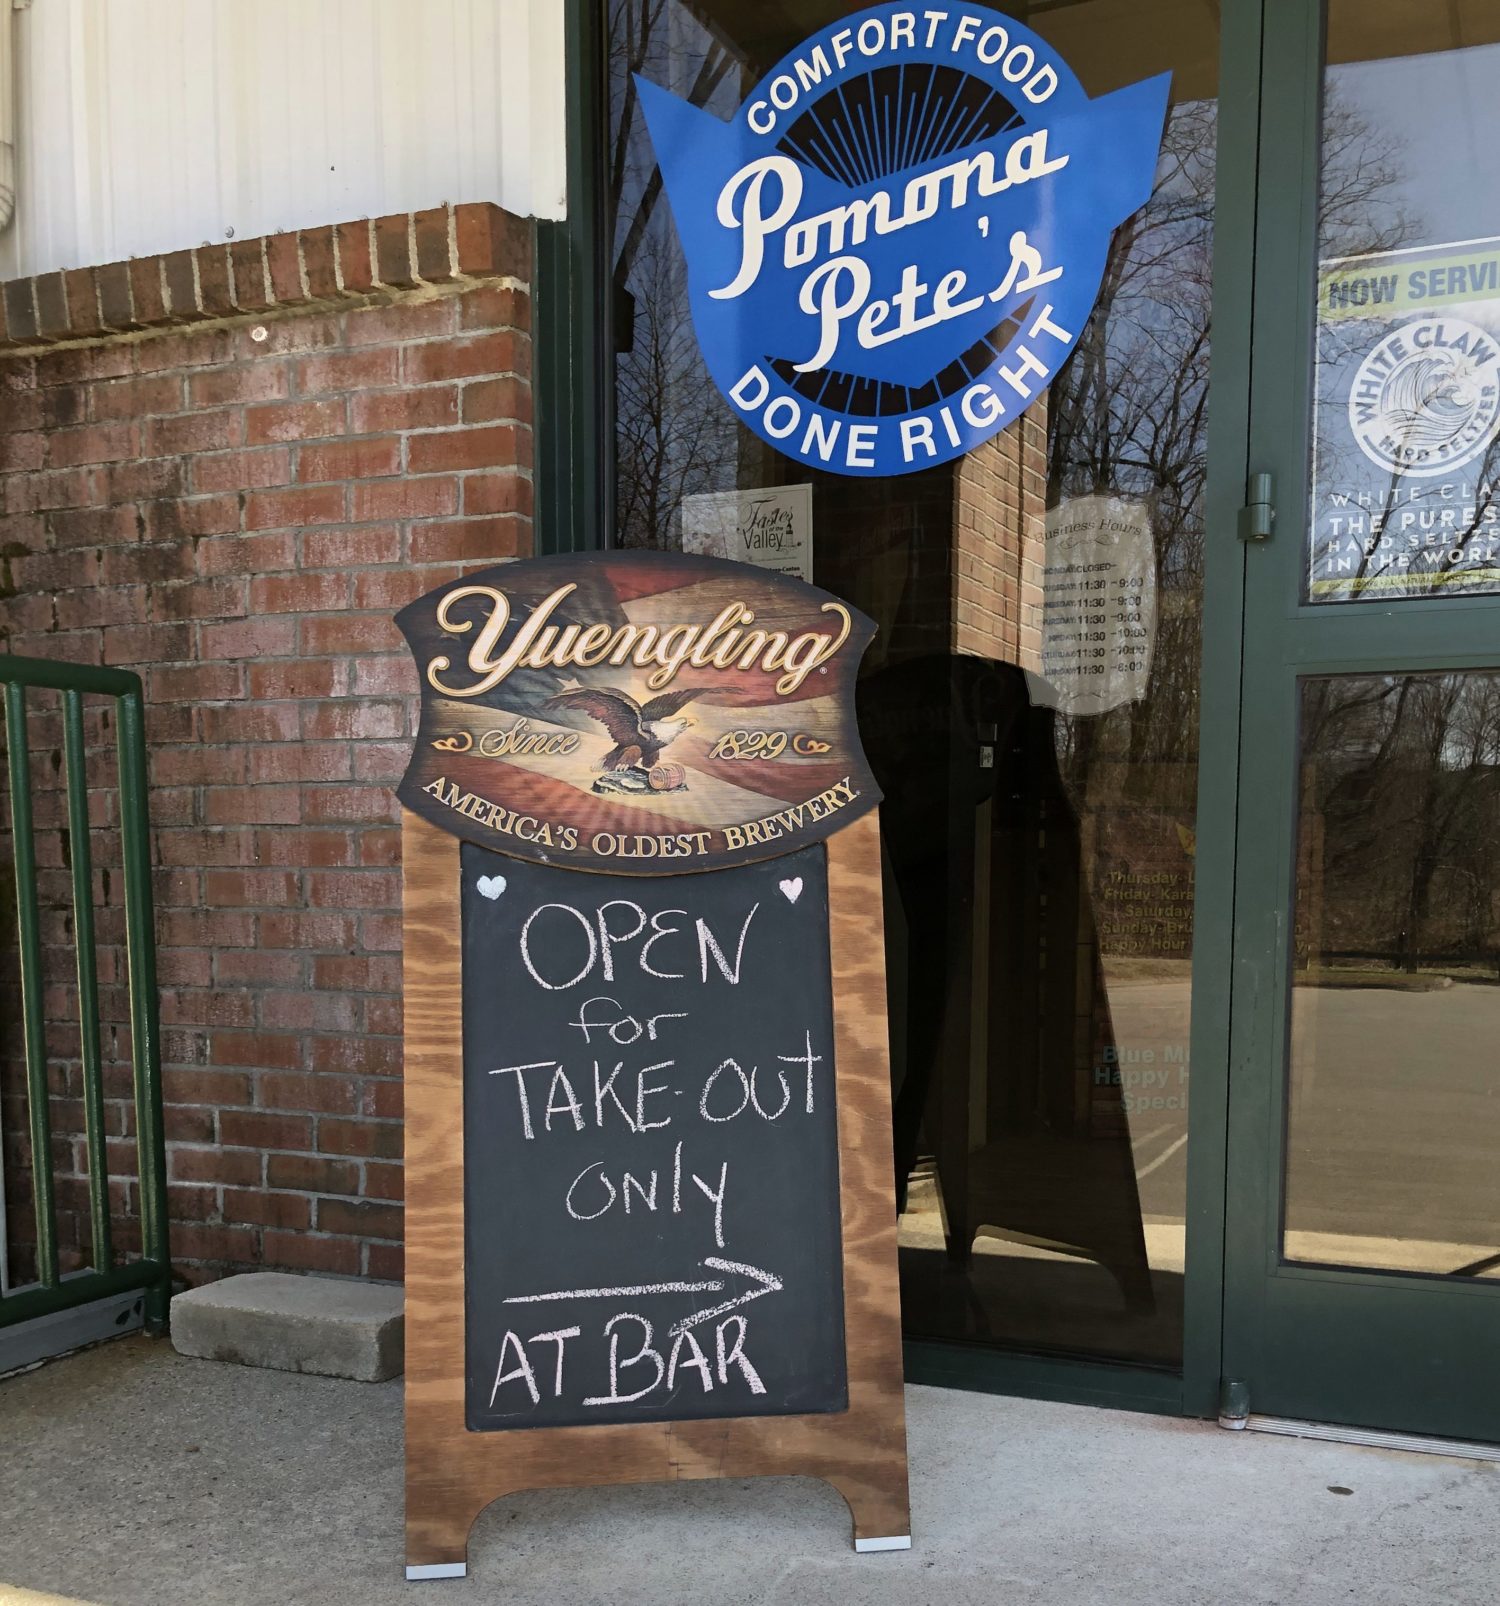 The exterior of a restaurant called "Pomona Pete's" with a sidewalk sign reading "Open for Take Out Only at Bar"